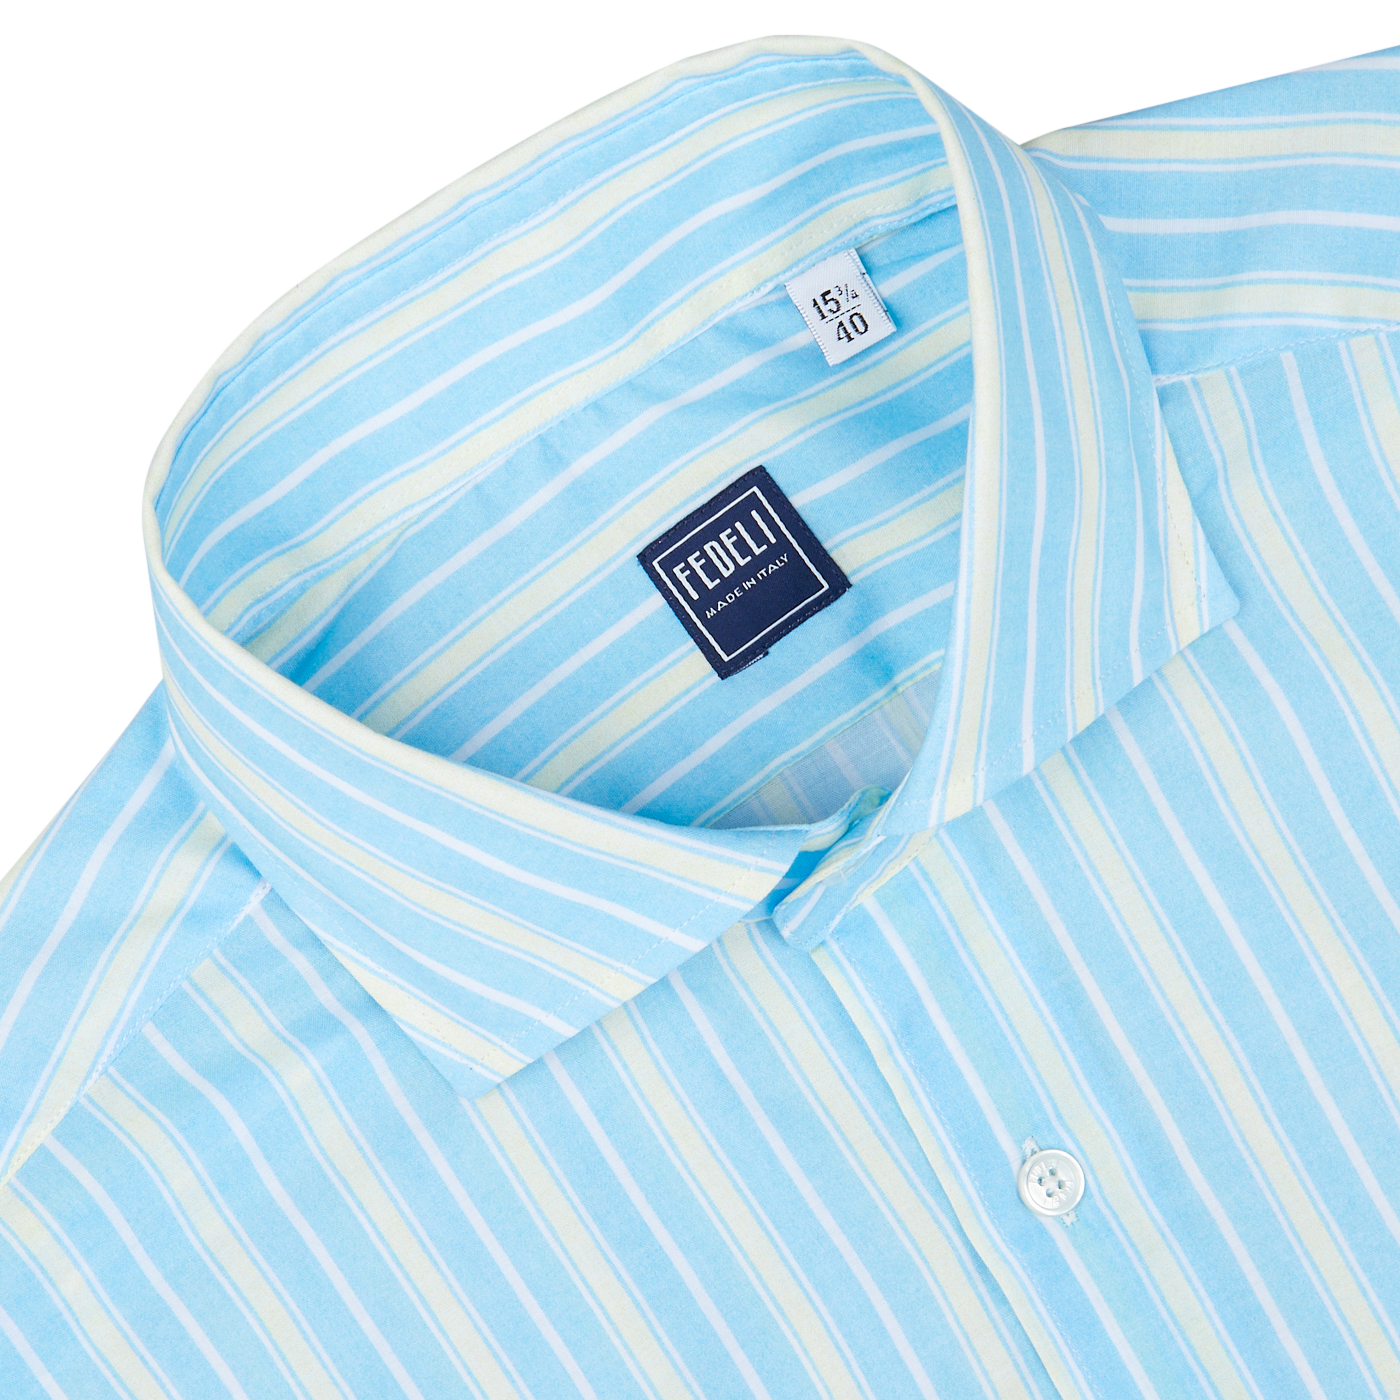 Sky Blue Yellow Striped Fedeli beach shirt with collar detail and size label visible, tailored in a slim fit from cotton stretch fabric.